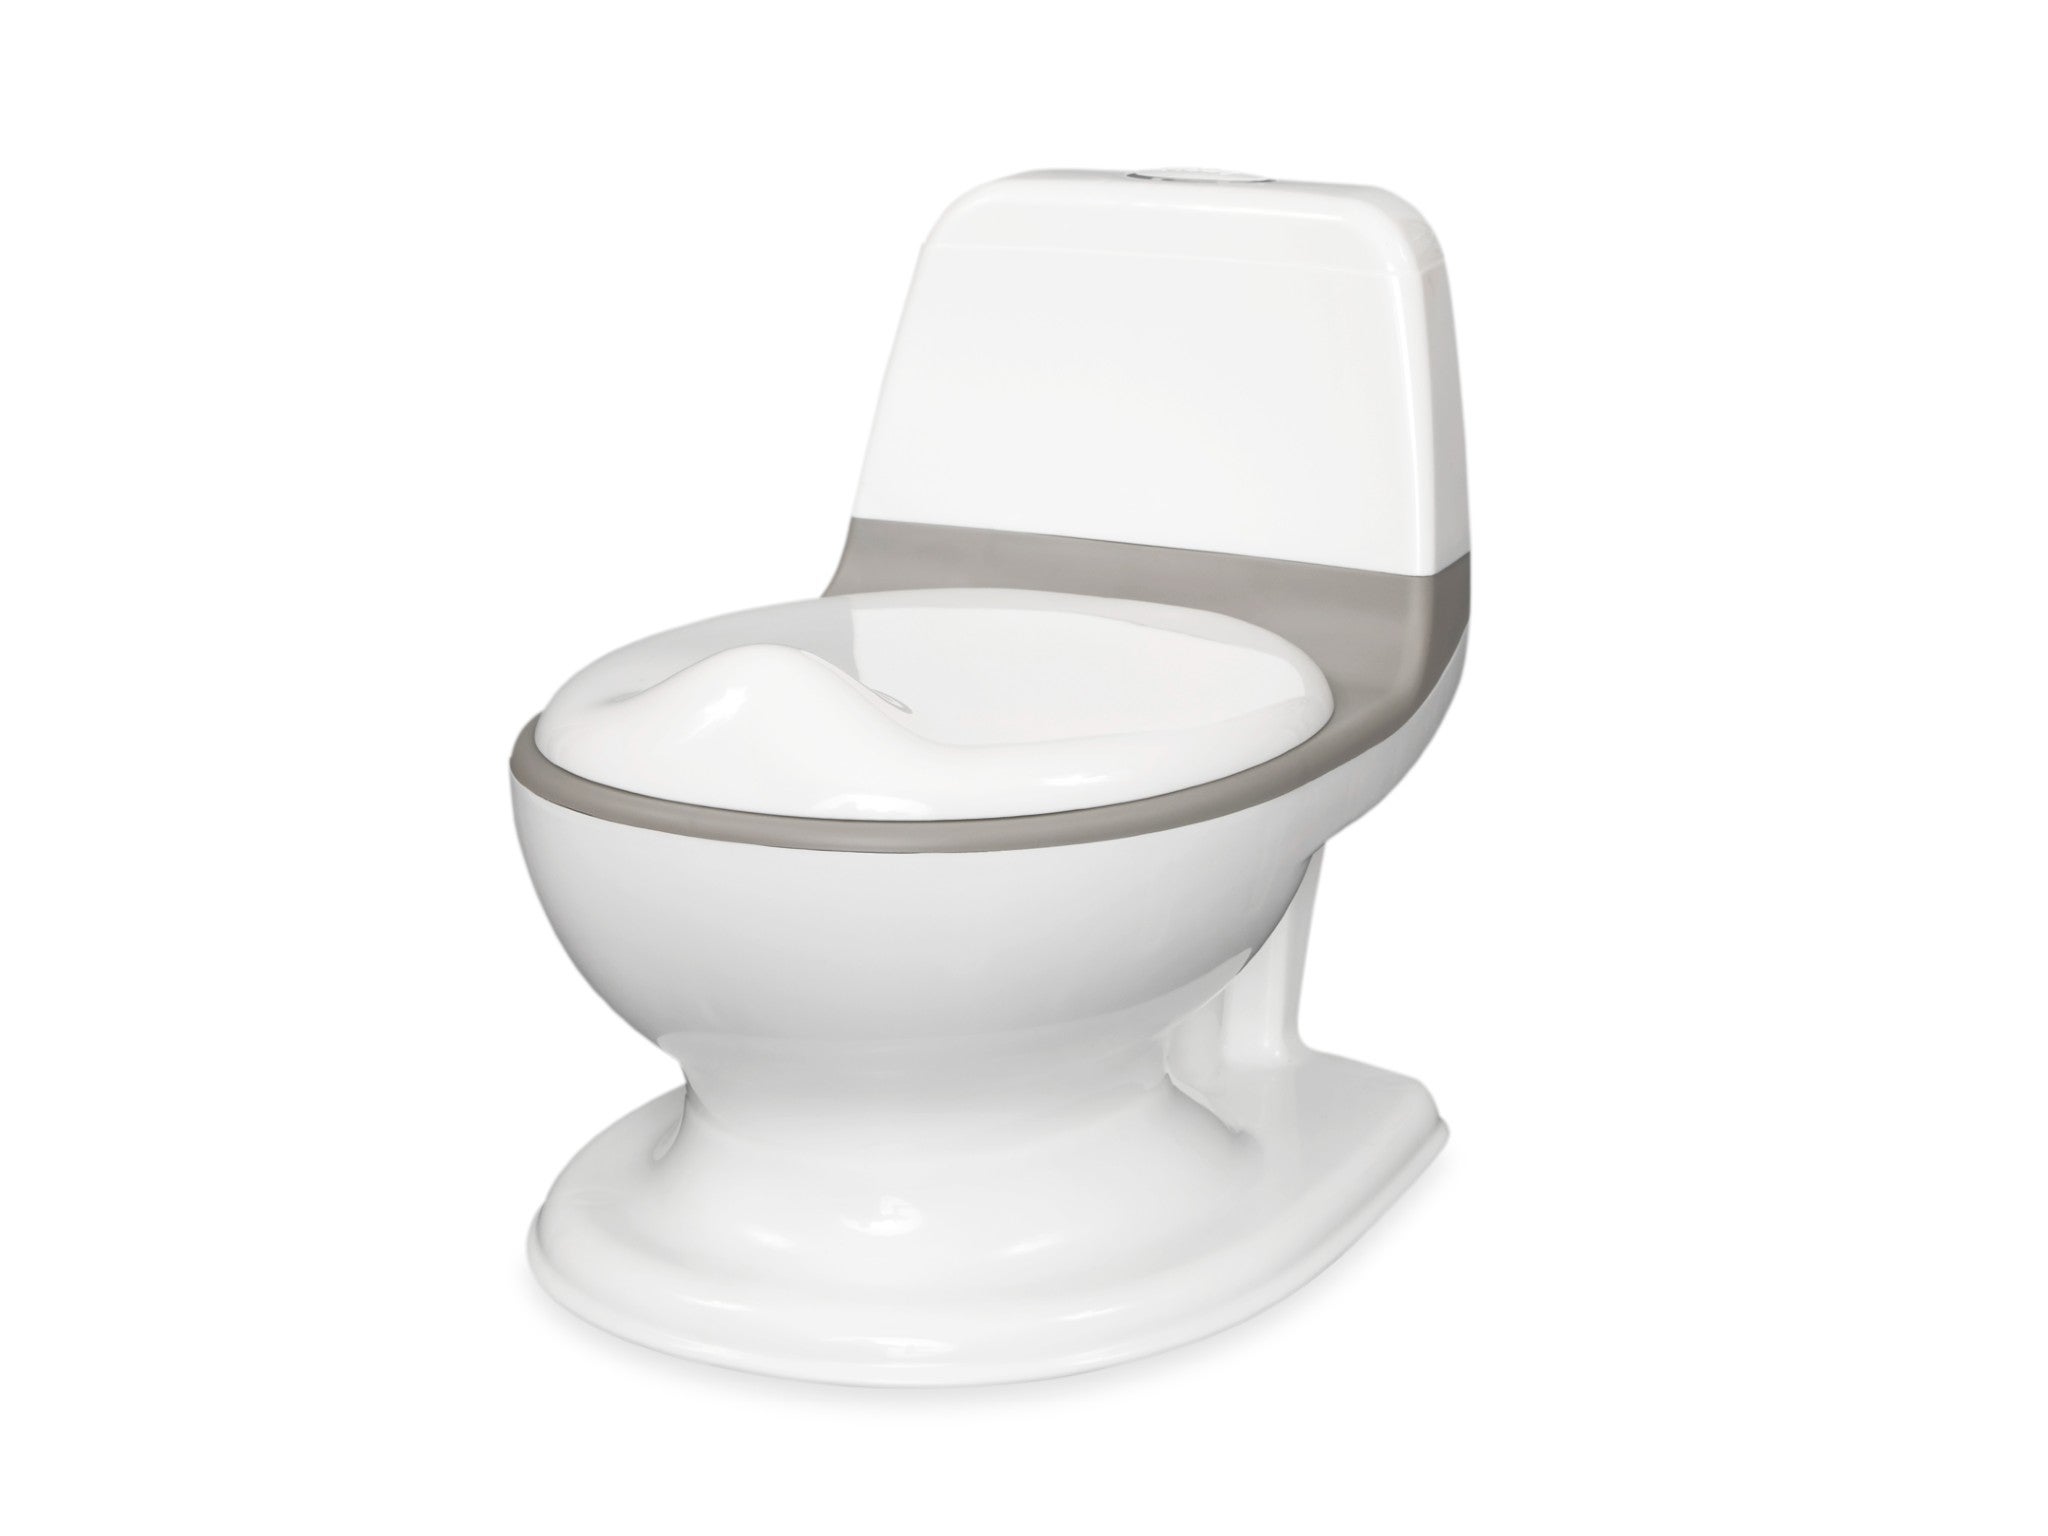 Never Loosen Potty Training Toilet Seat for Toddlers Removable Seat Fits Both Adults and Children Slow Close Toilet Seat With Built-In Toddler Seat White Elongated Thicken Plastic Easy to Clean 